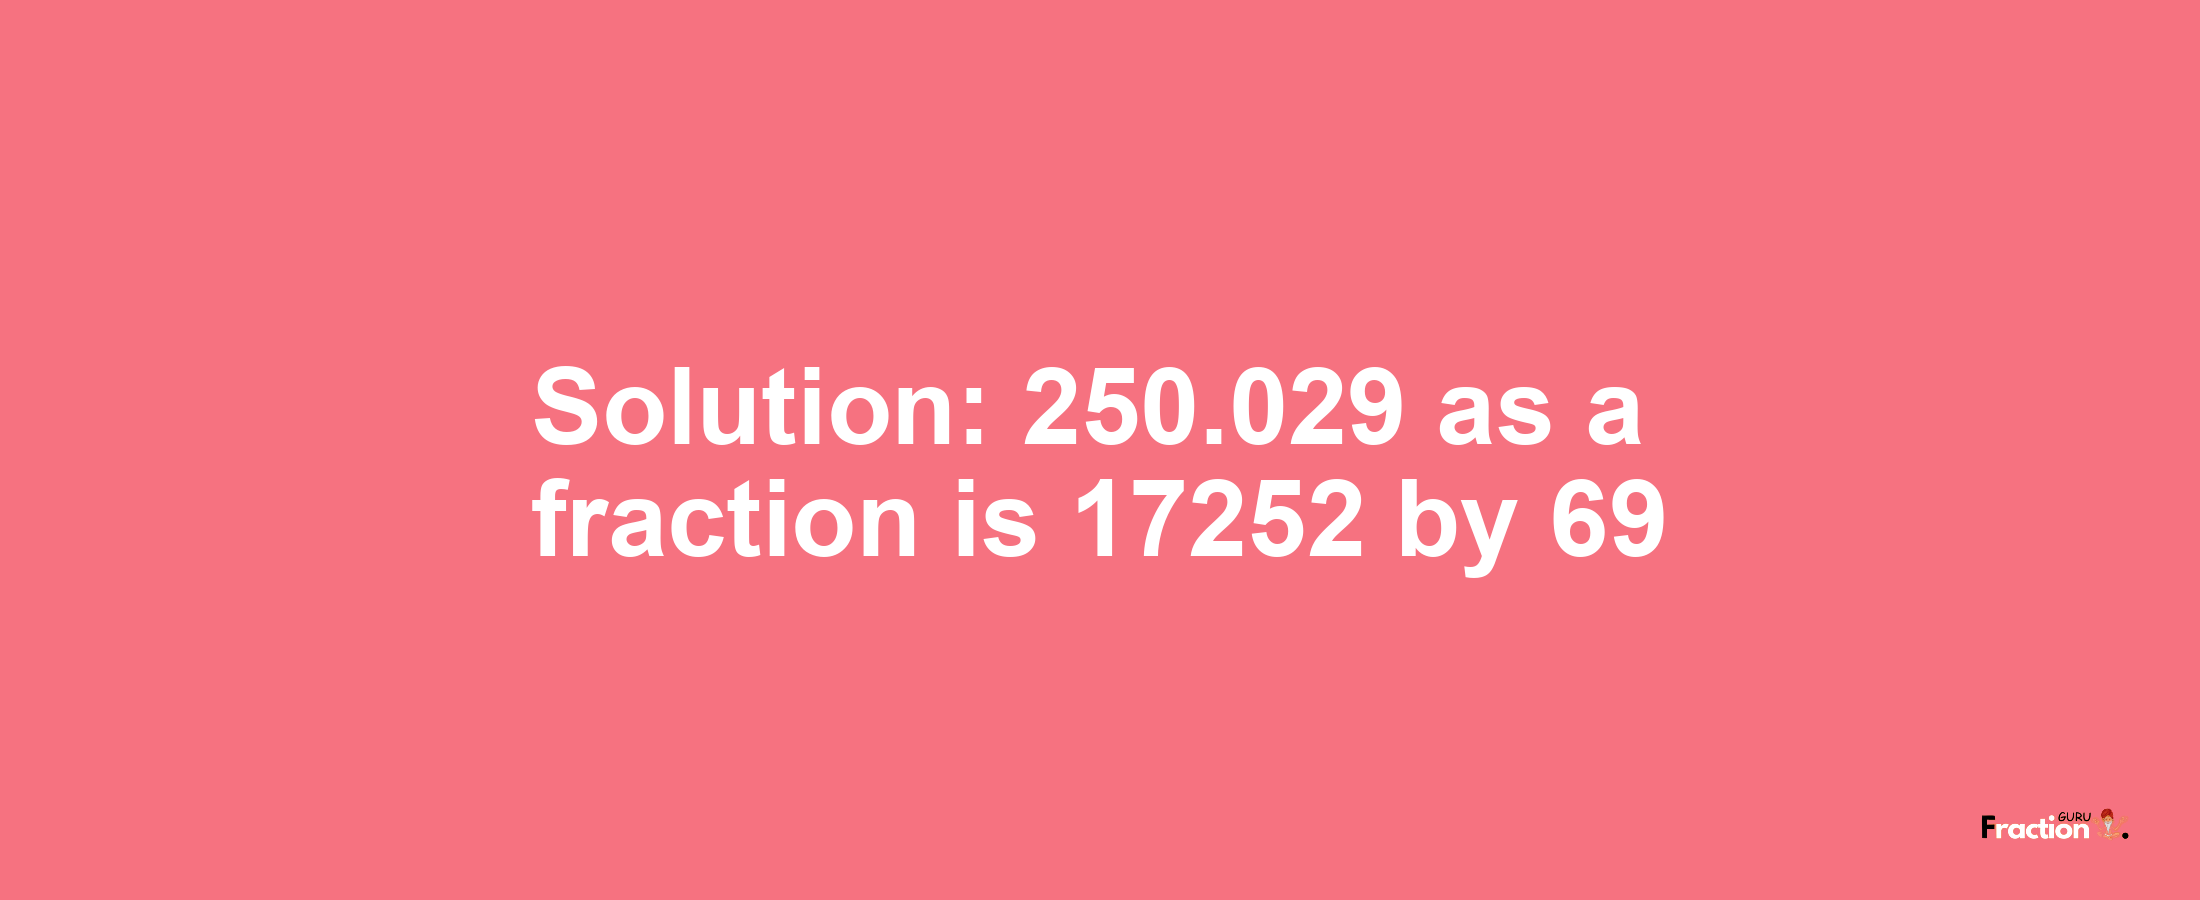 Solution:250.029 as a fraction is 17252/69